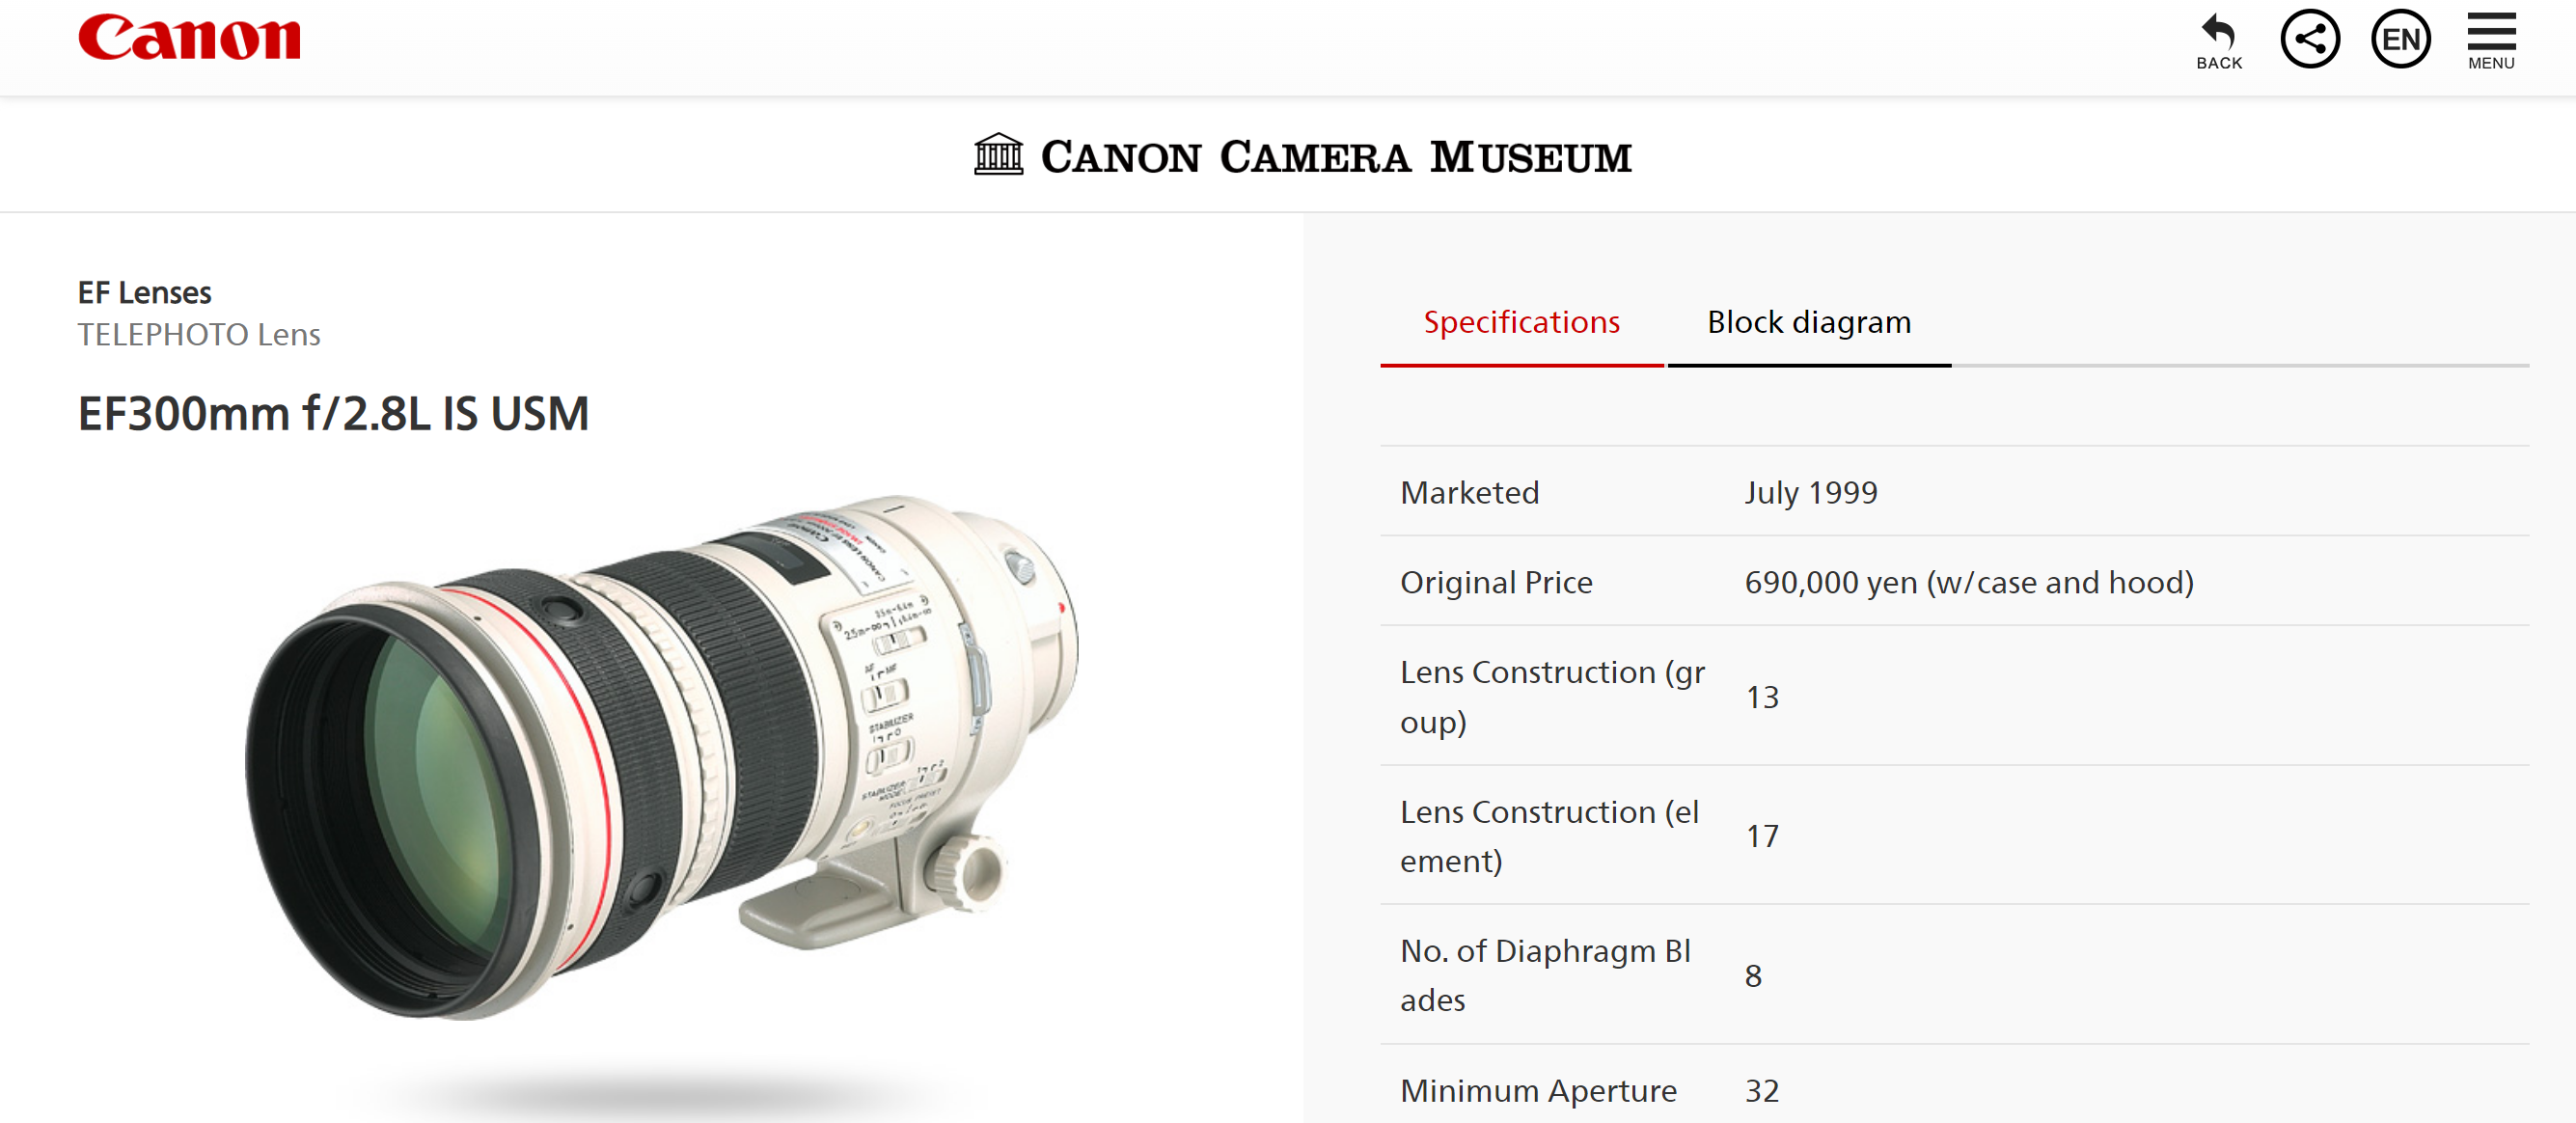 EF50mm f/1.8 STM - Canon Camera Museum